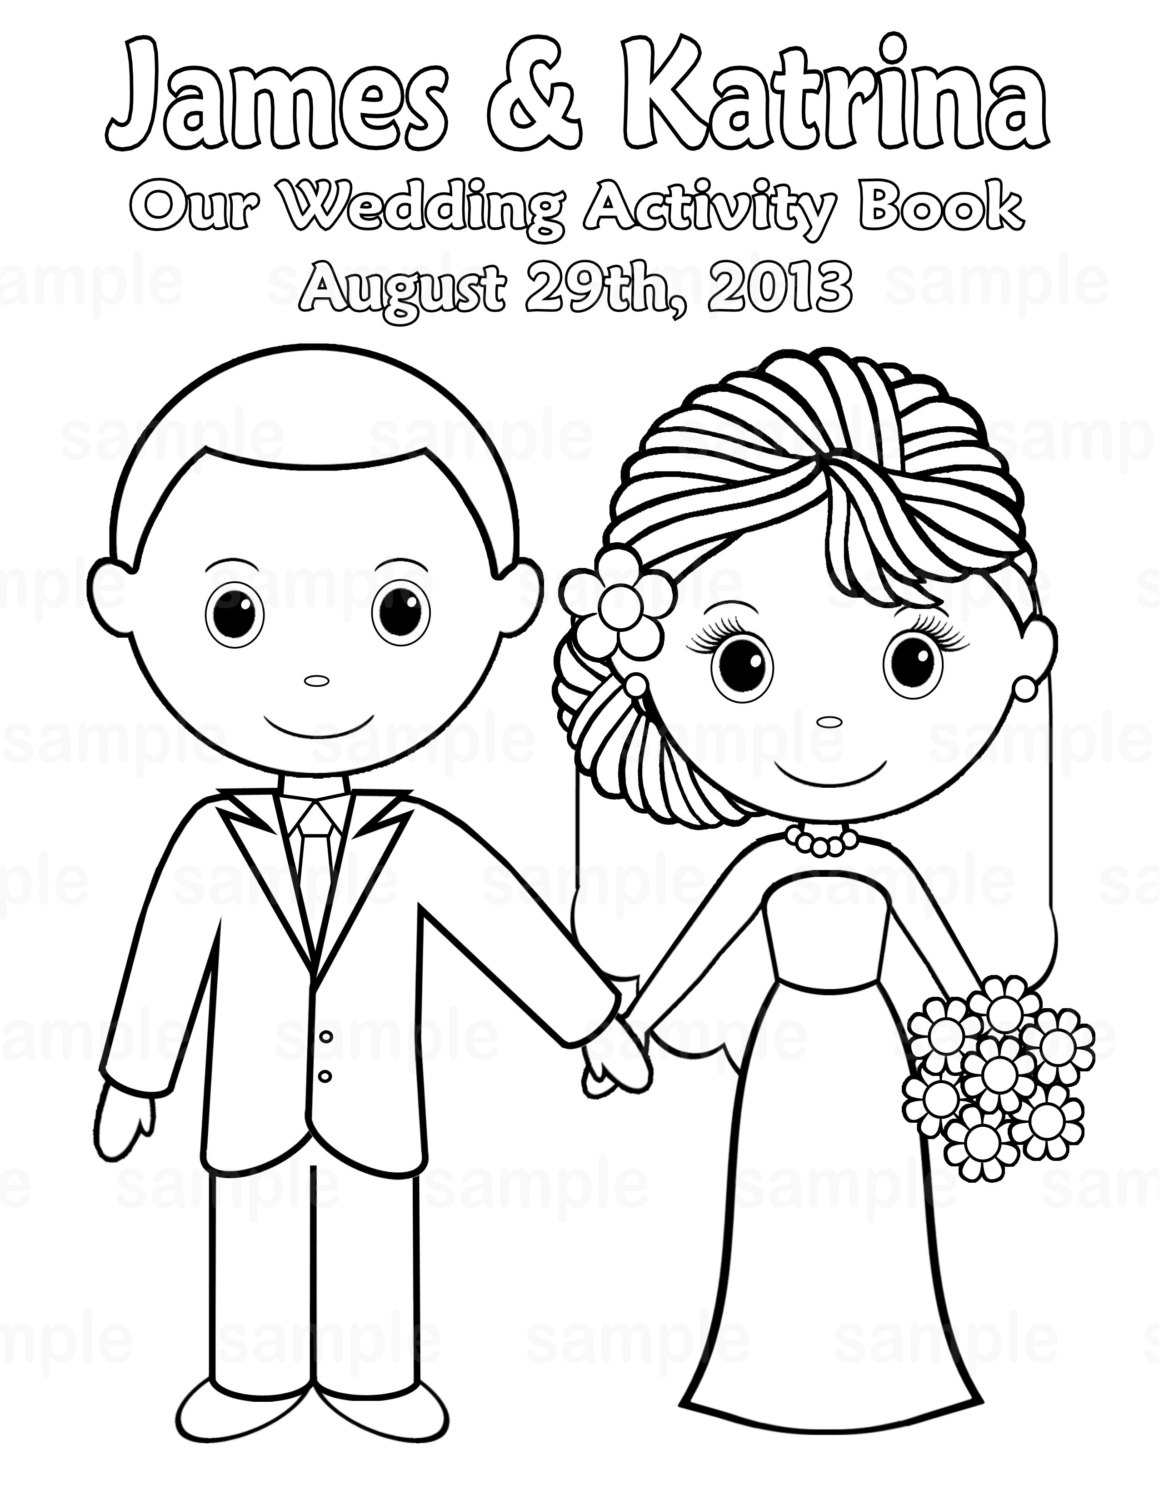 colouring-free-printable-wedding-activity-book-pages-free-printable